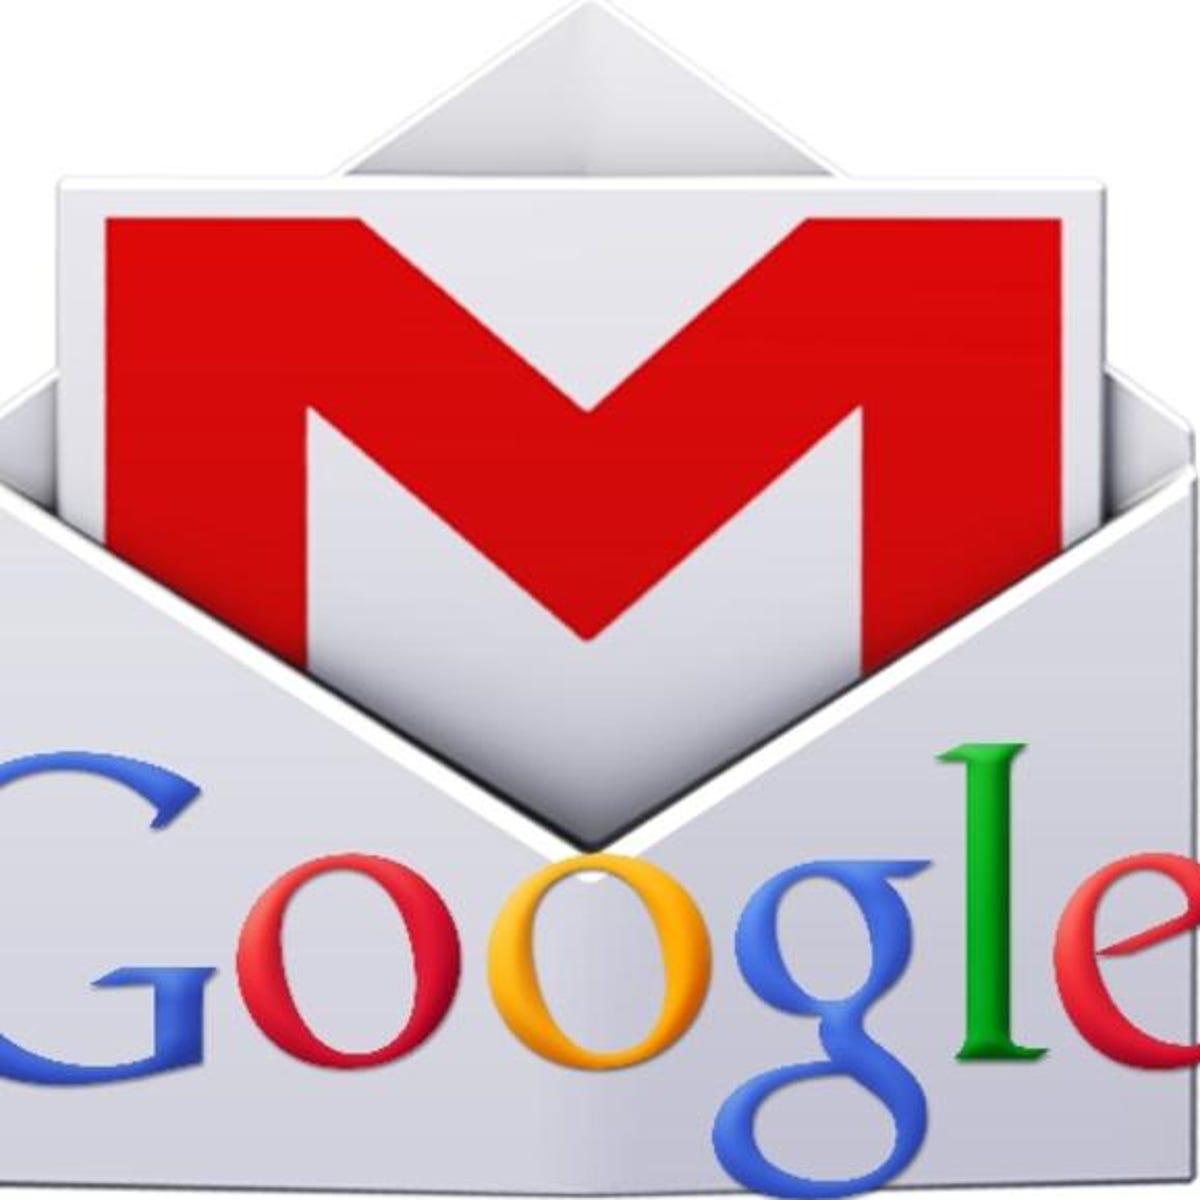 STEPS TO CREATE A GMAIL ACCOUNT WITHOUT A PHONE NUMBER IN 2022